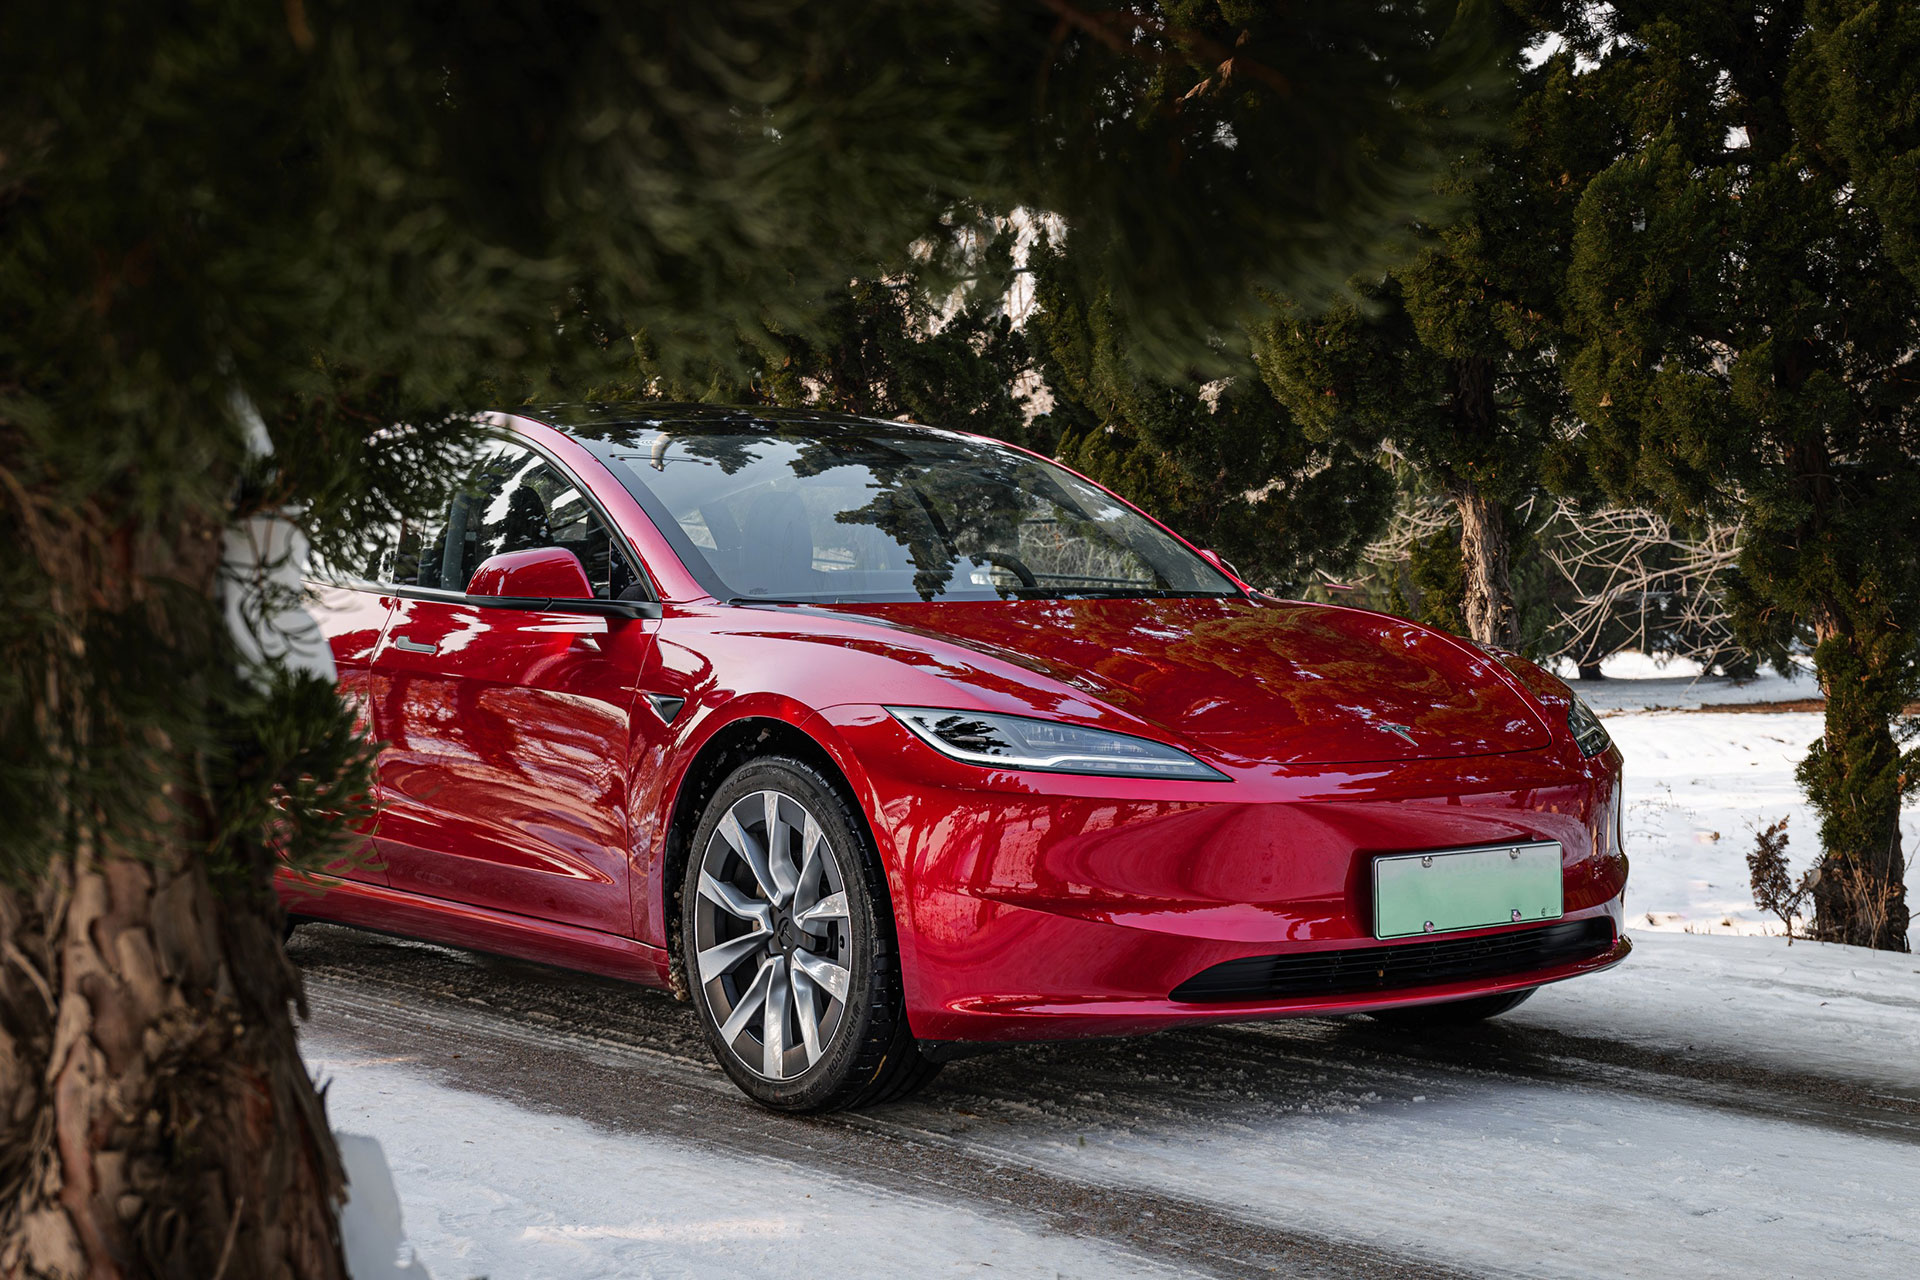 Tesla (TSLA) launches Model 3 Highland in the US and Canada